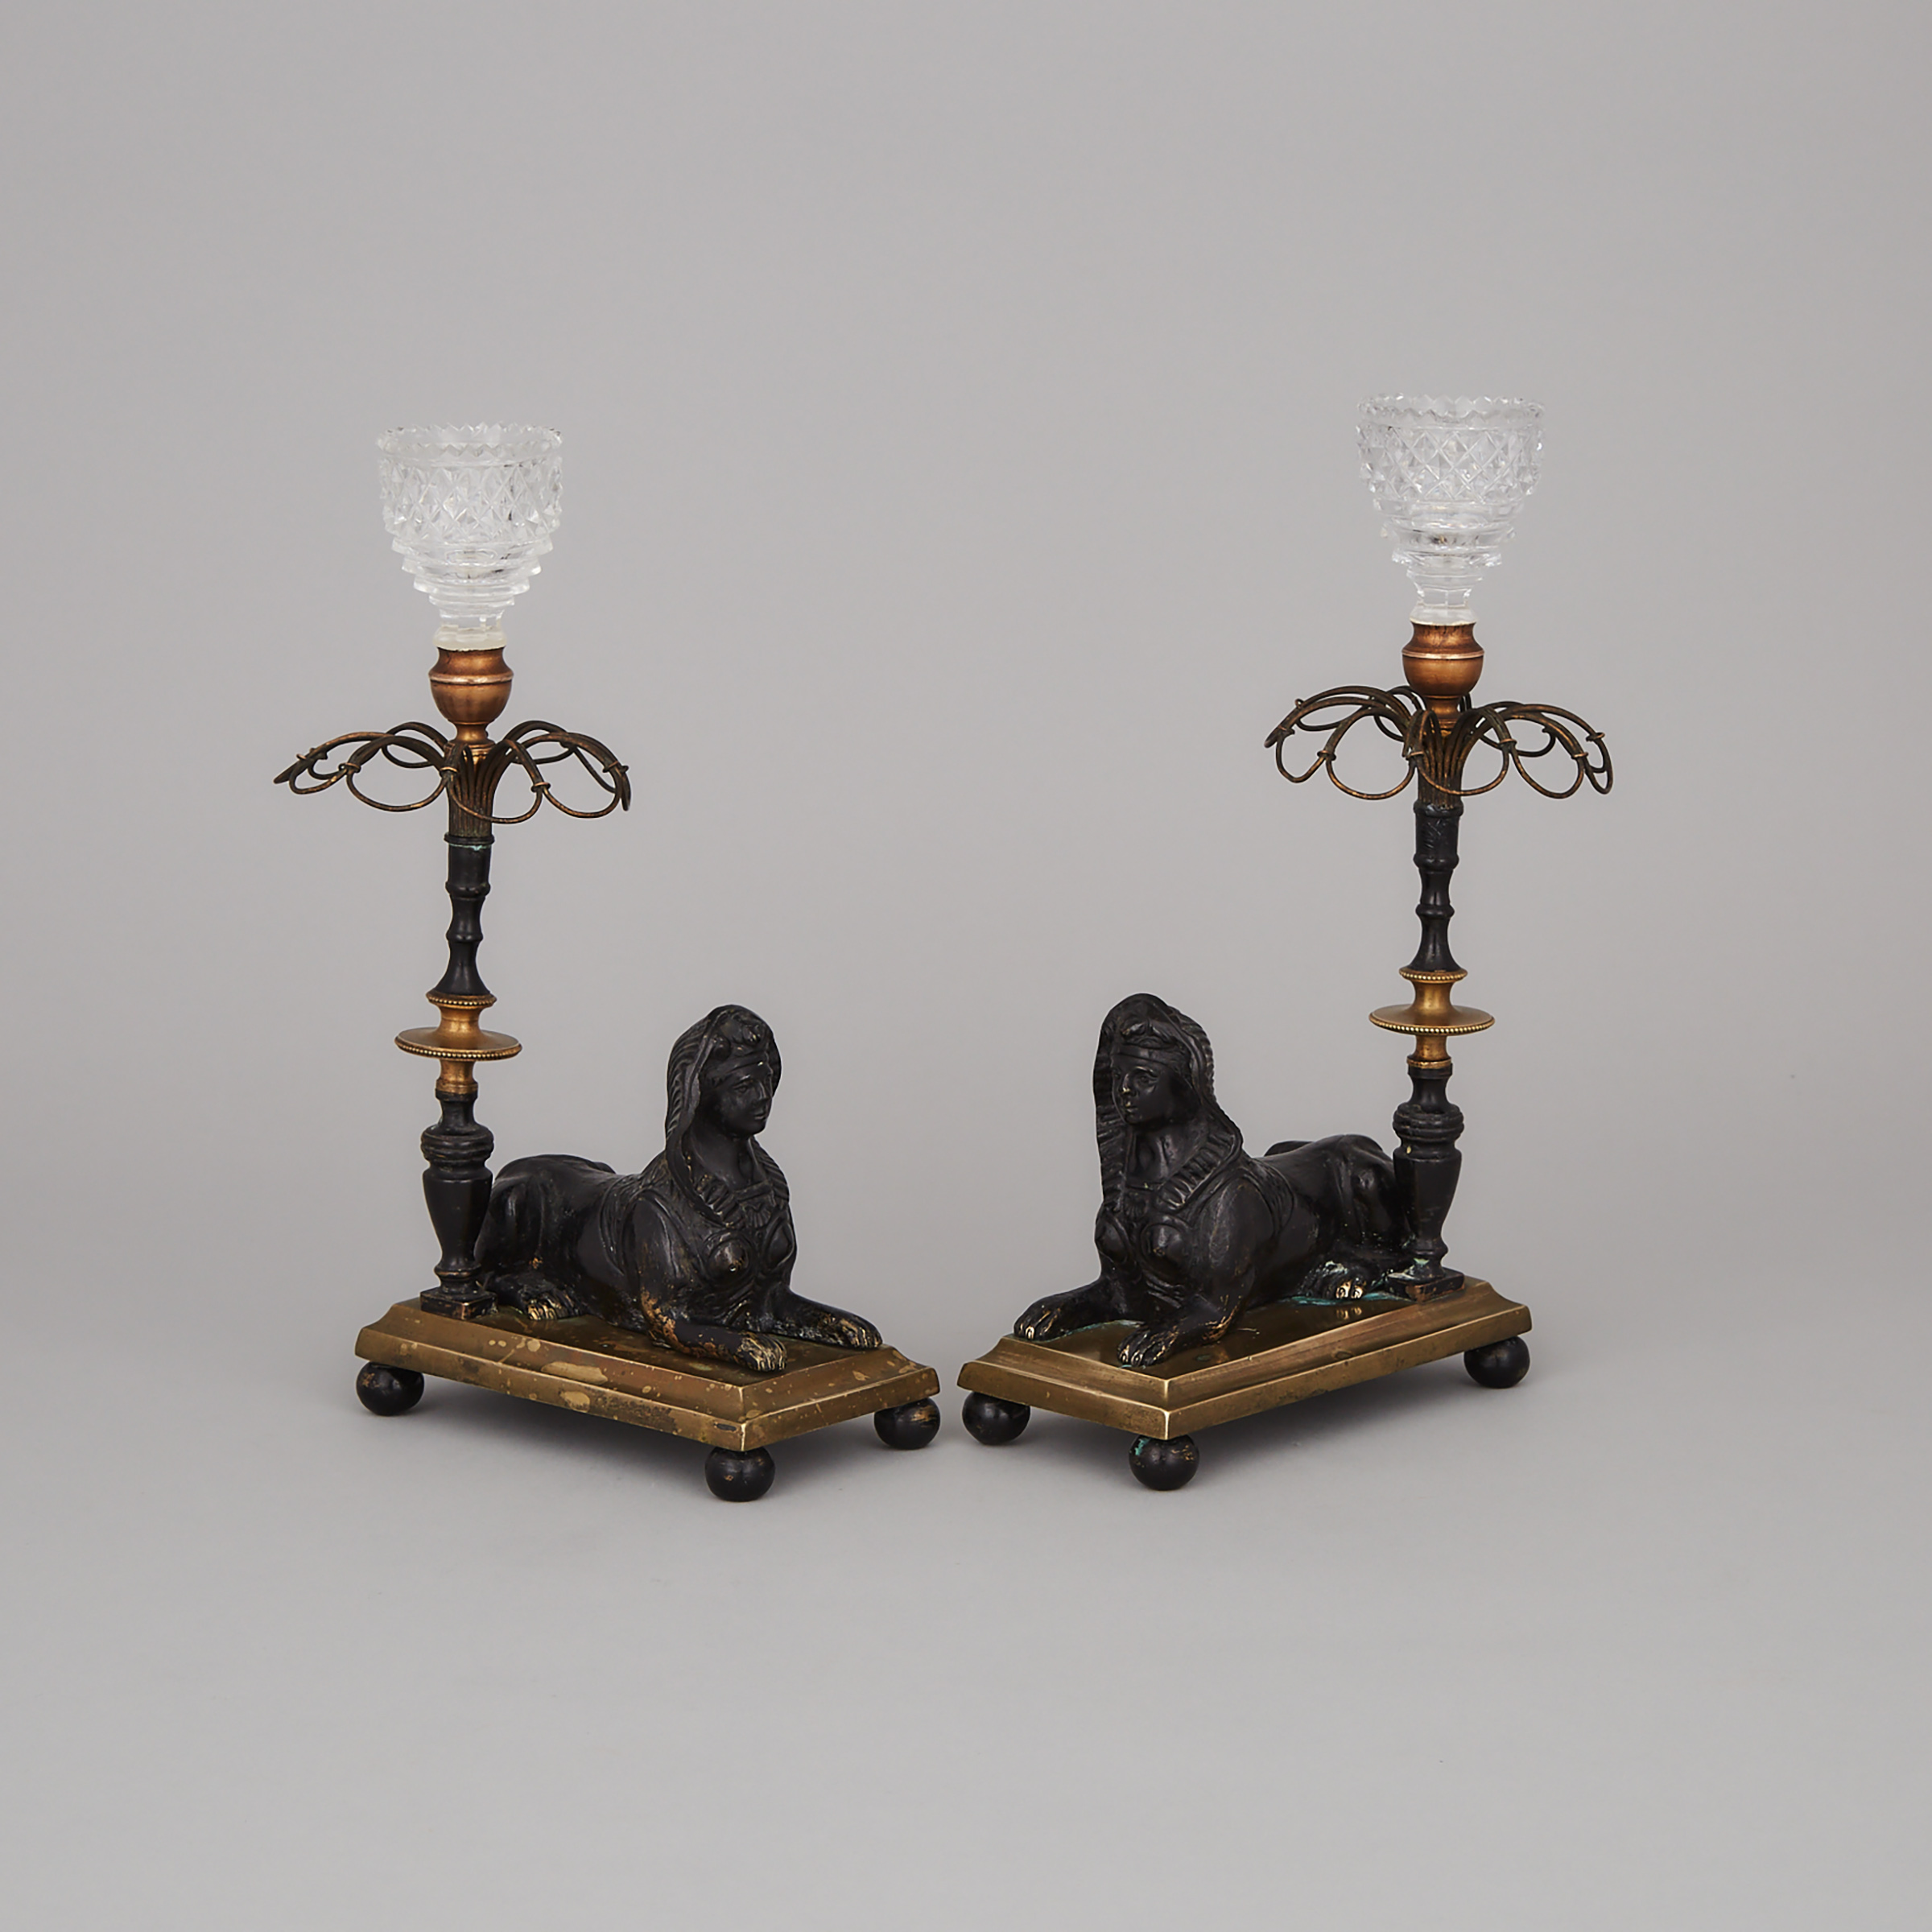 Pair of Regency Egyptian Revival Candle Sticks, early 19th century